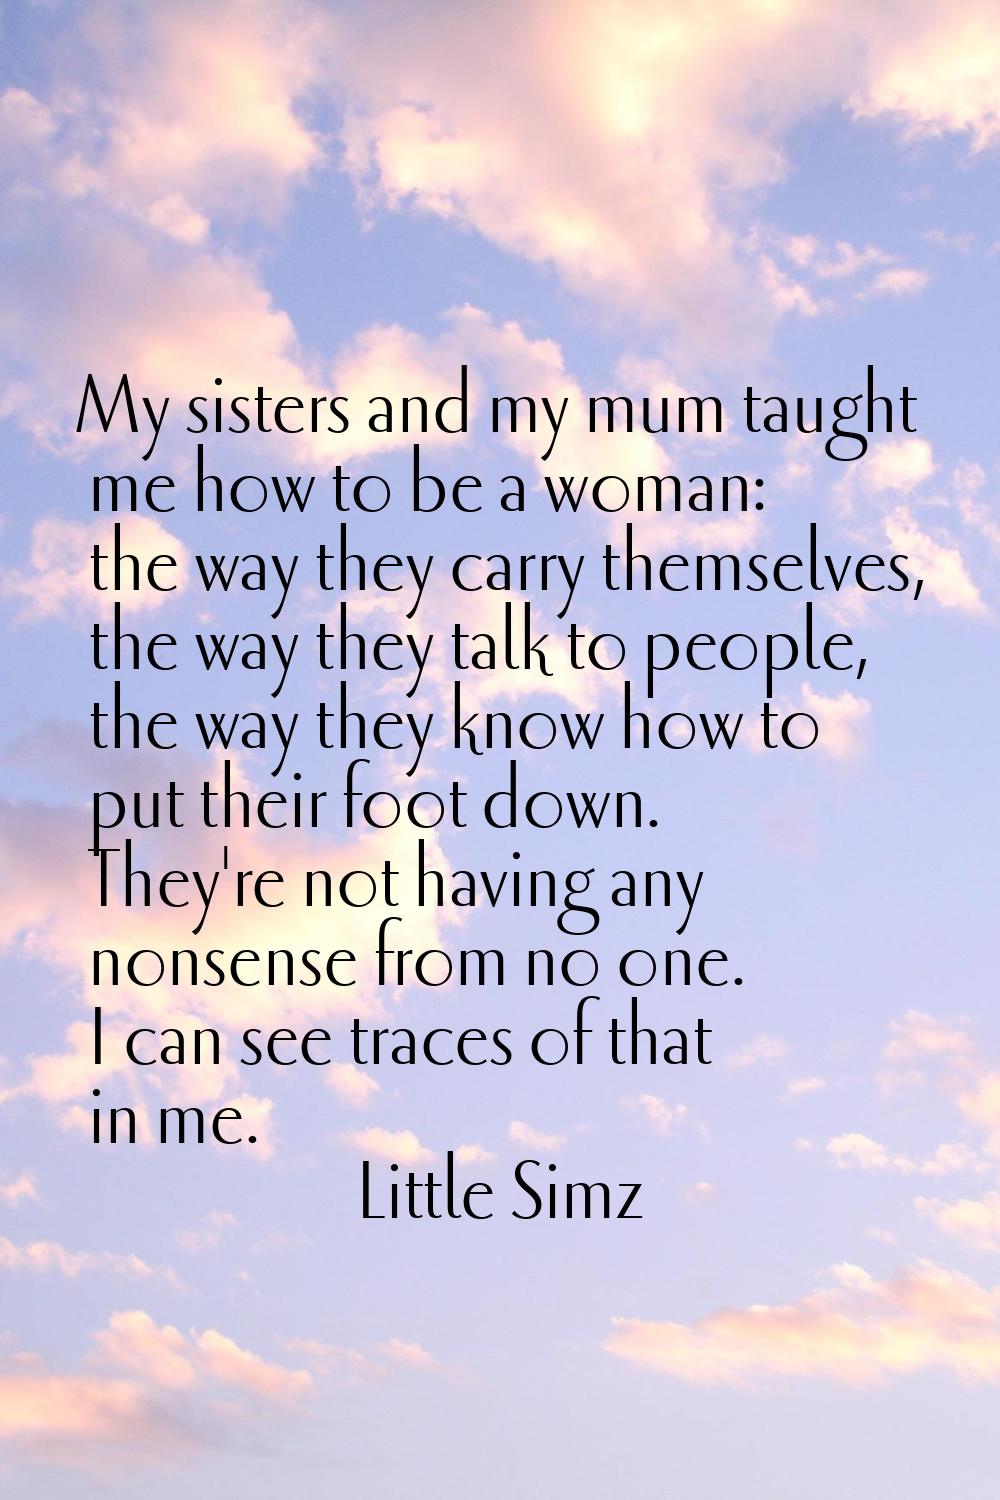 My sisters and my mum taught me how to be a woman: the way they carry themselves, the way they talk